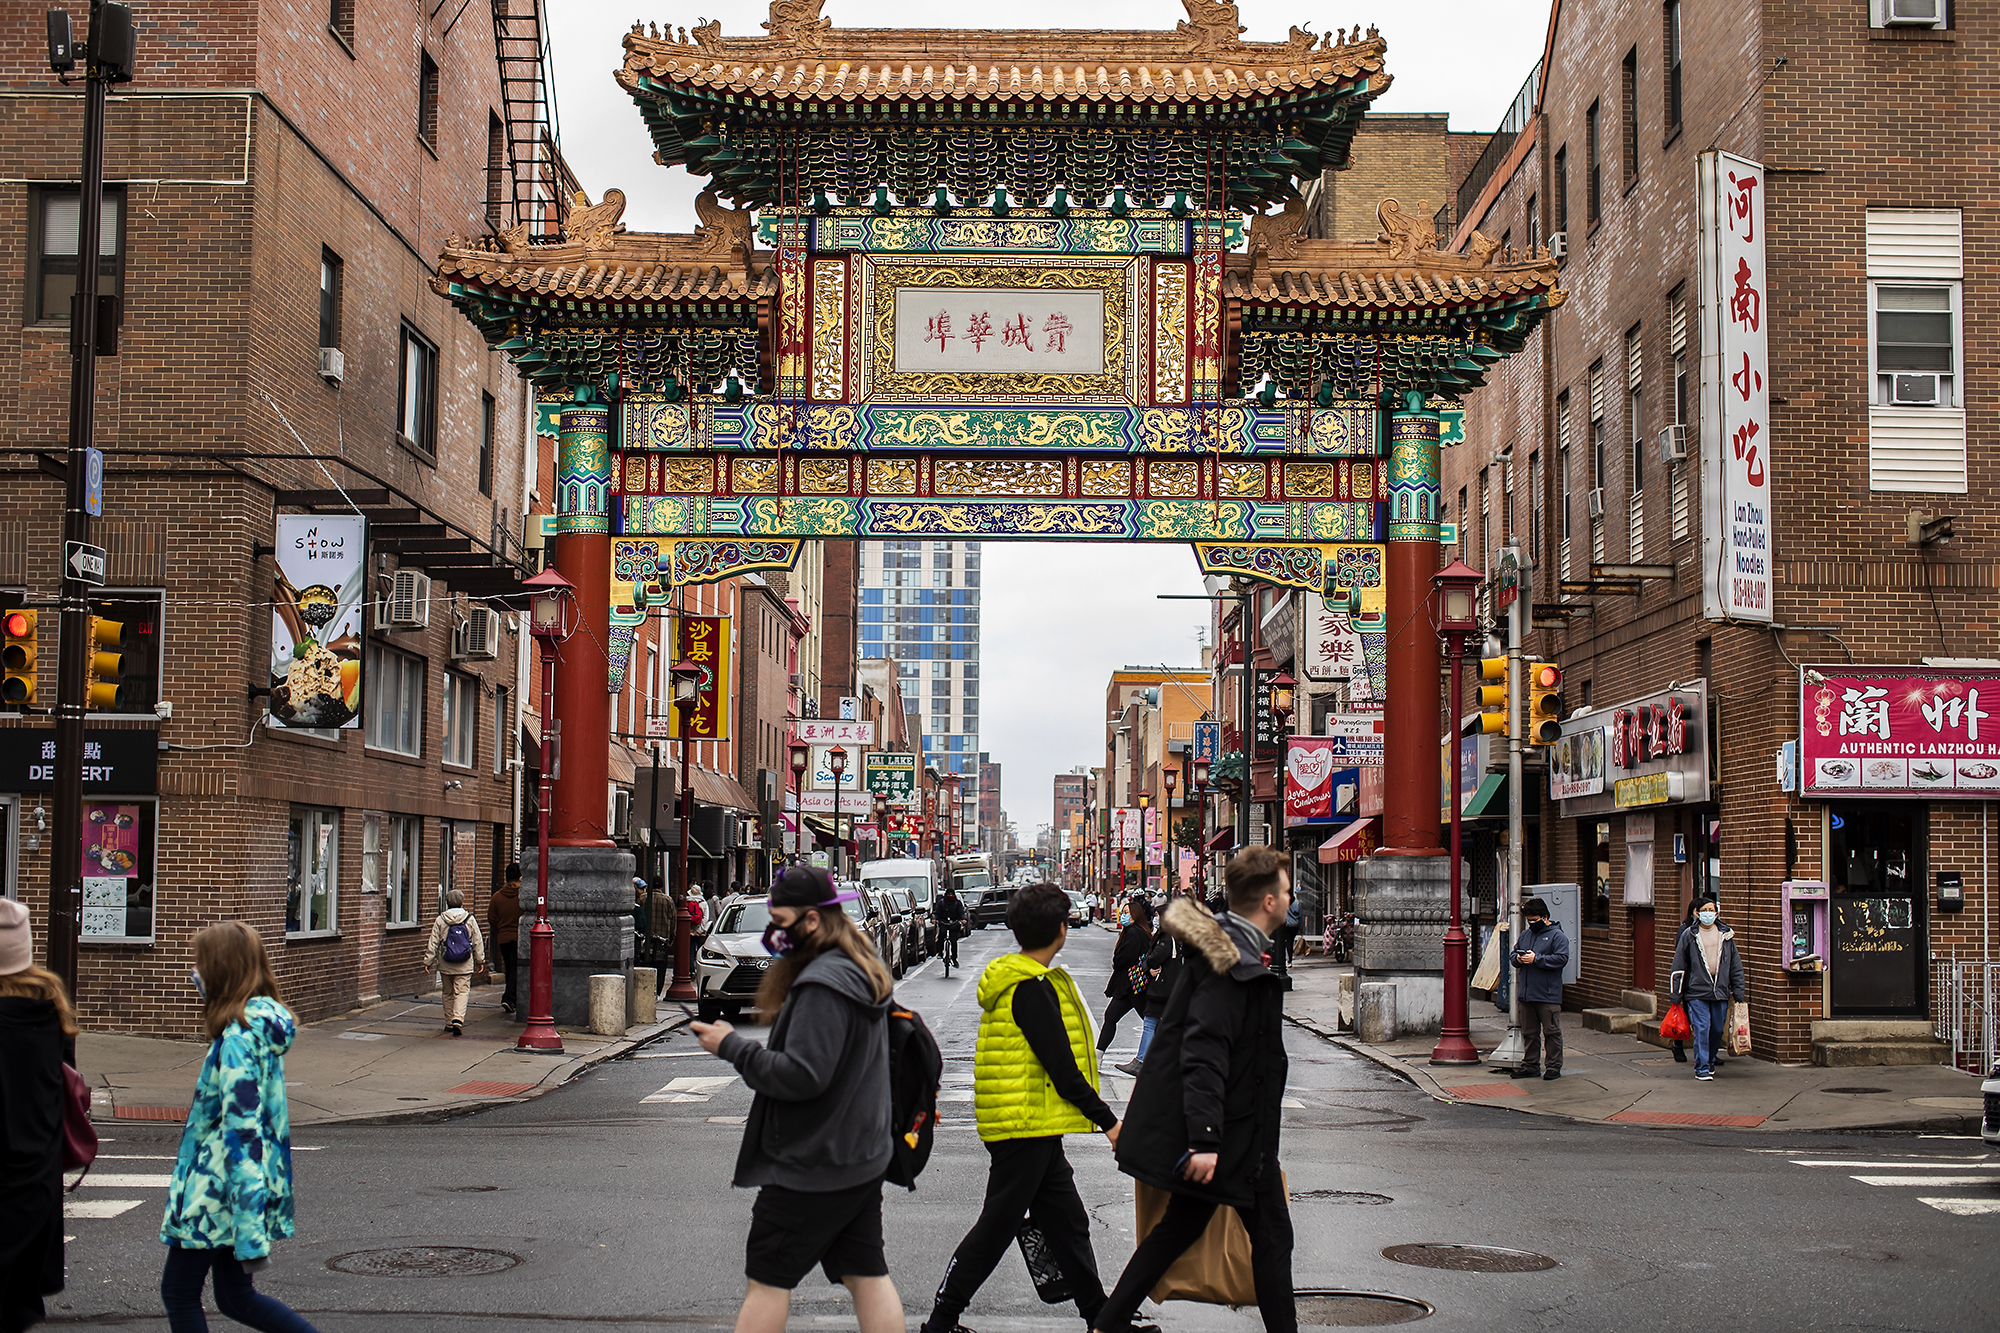 The iconic “Frienship Gate” at 10th and Arch St. marks the entrance to Philadelphia’s historic Chinatown.